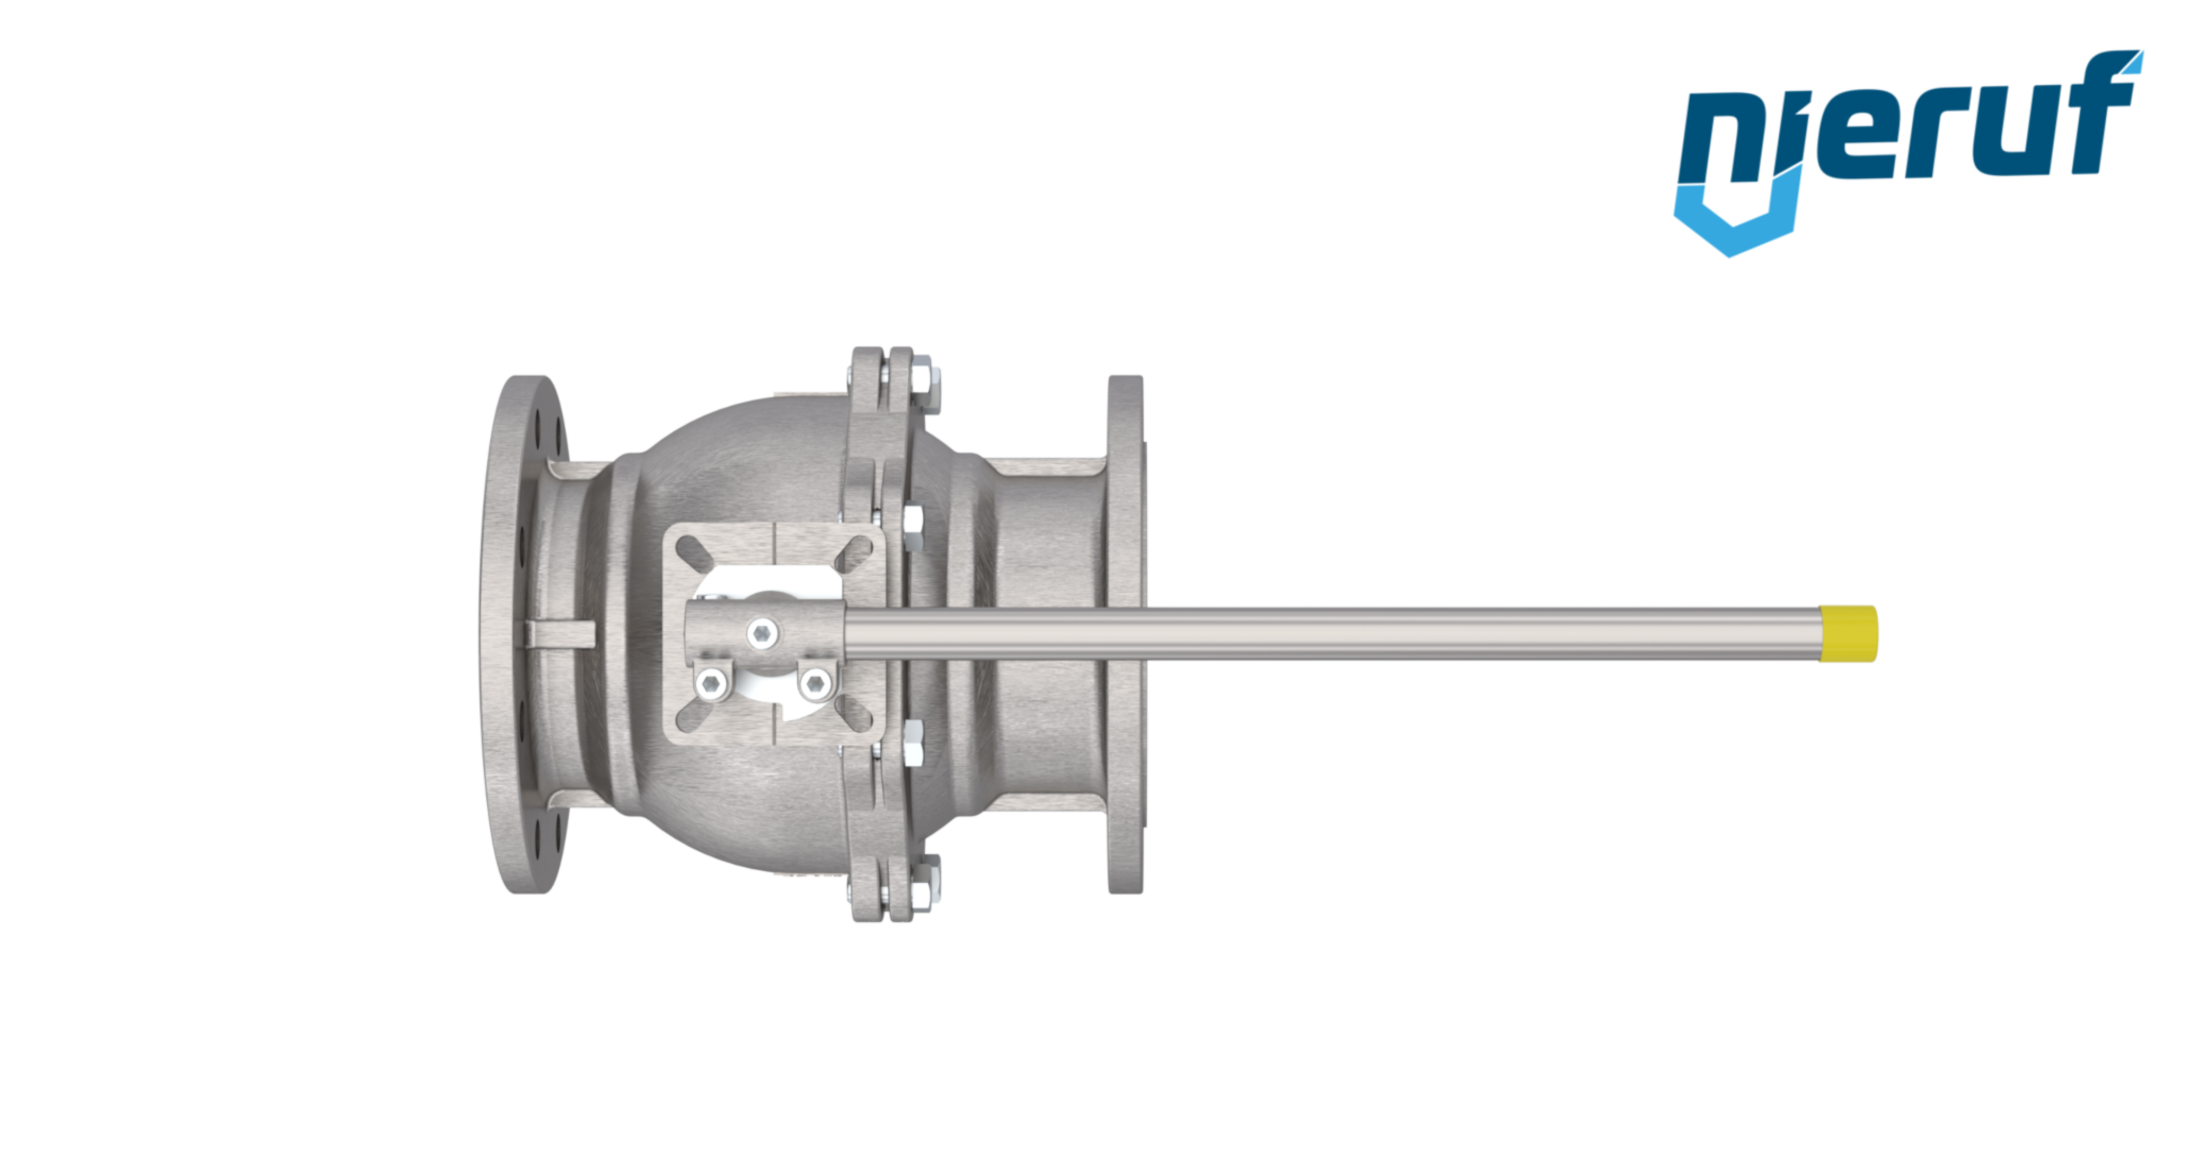 high temperature flange ball valve FK05 DN100 PN16 made of stainless steel 1.4408 up to +300